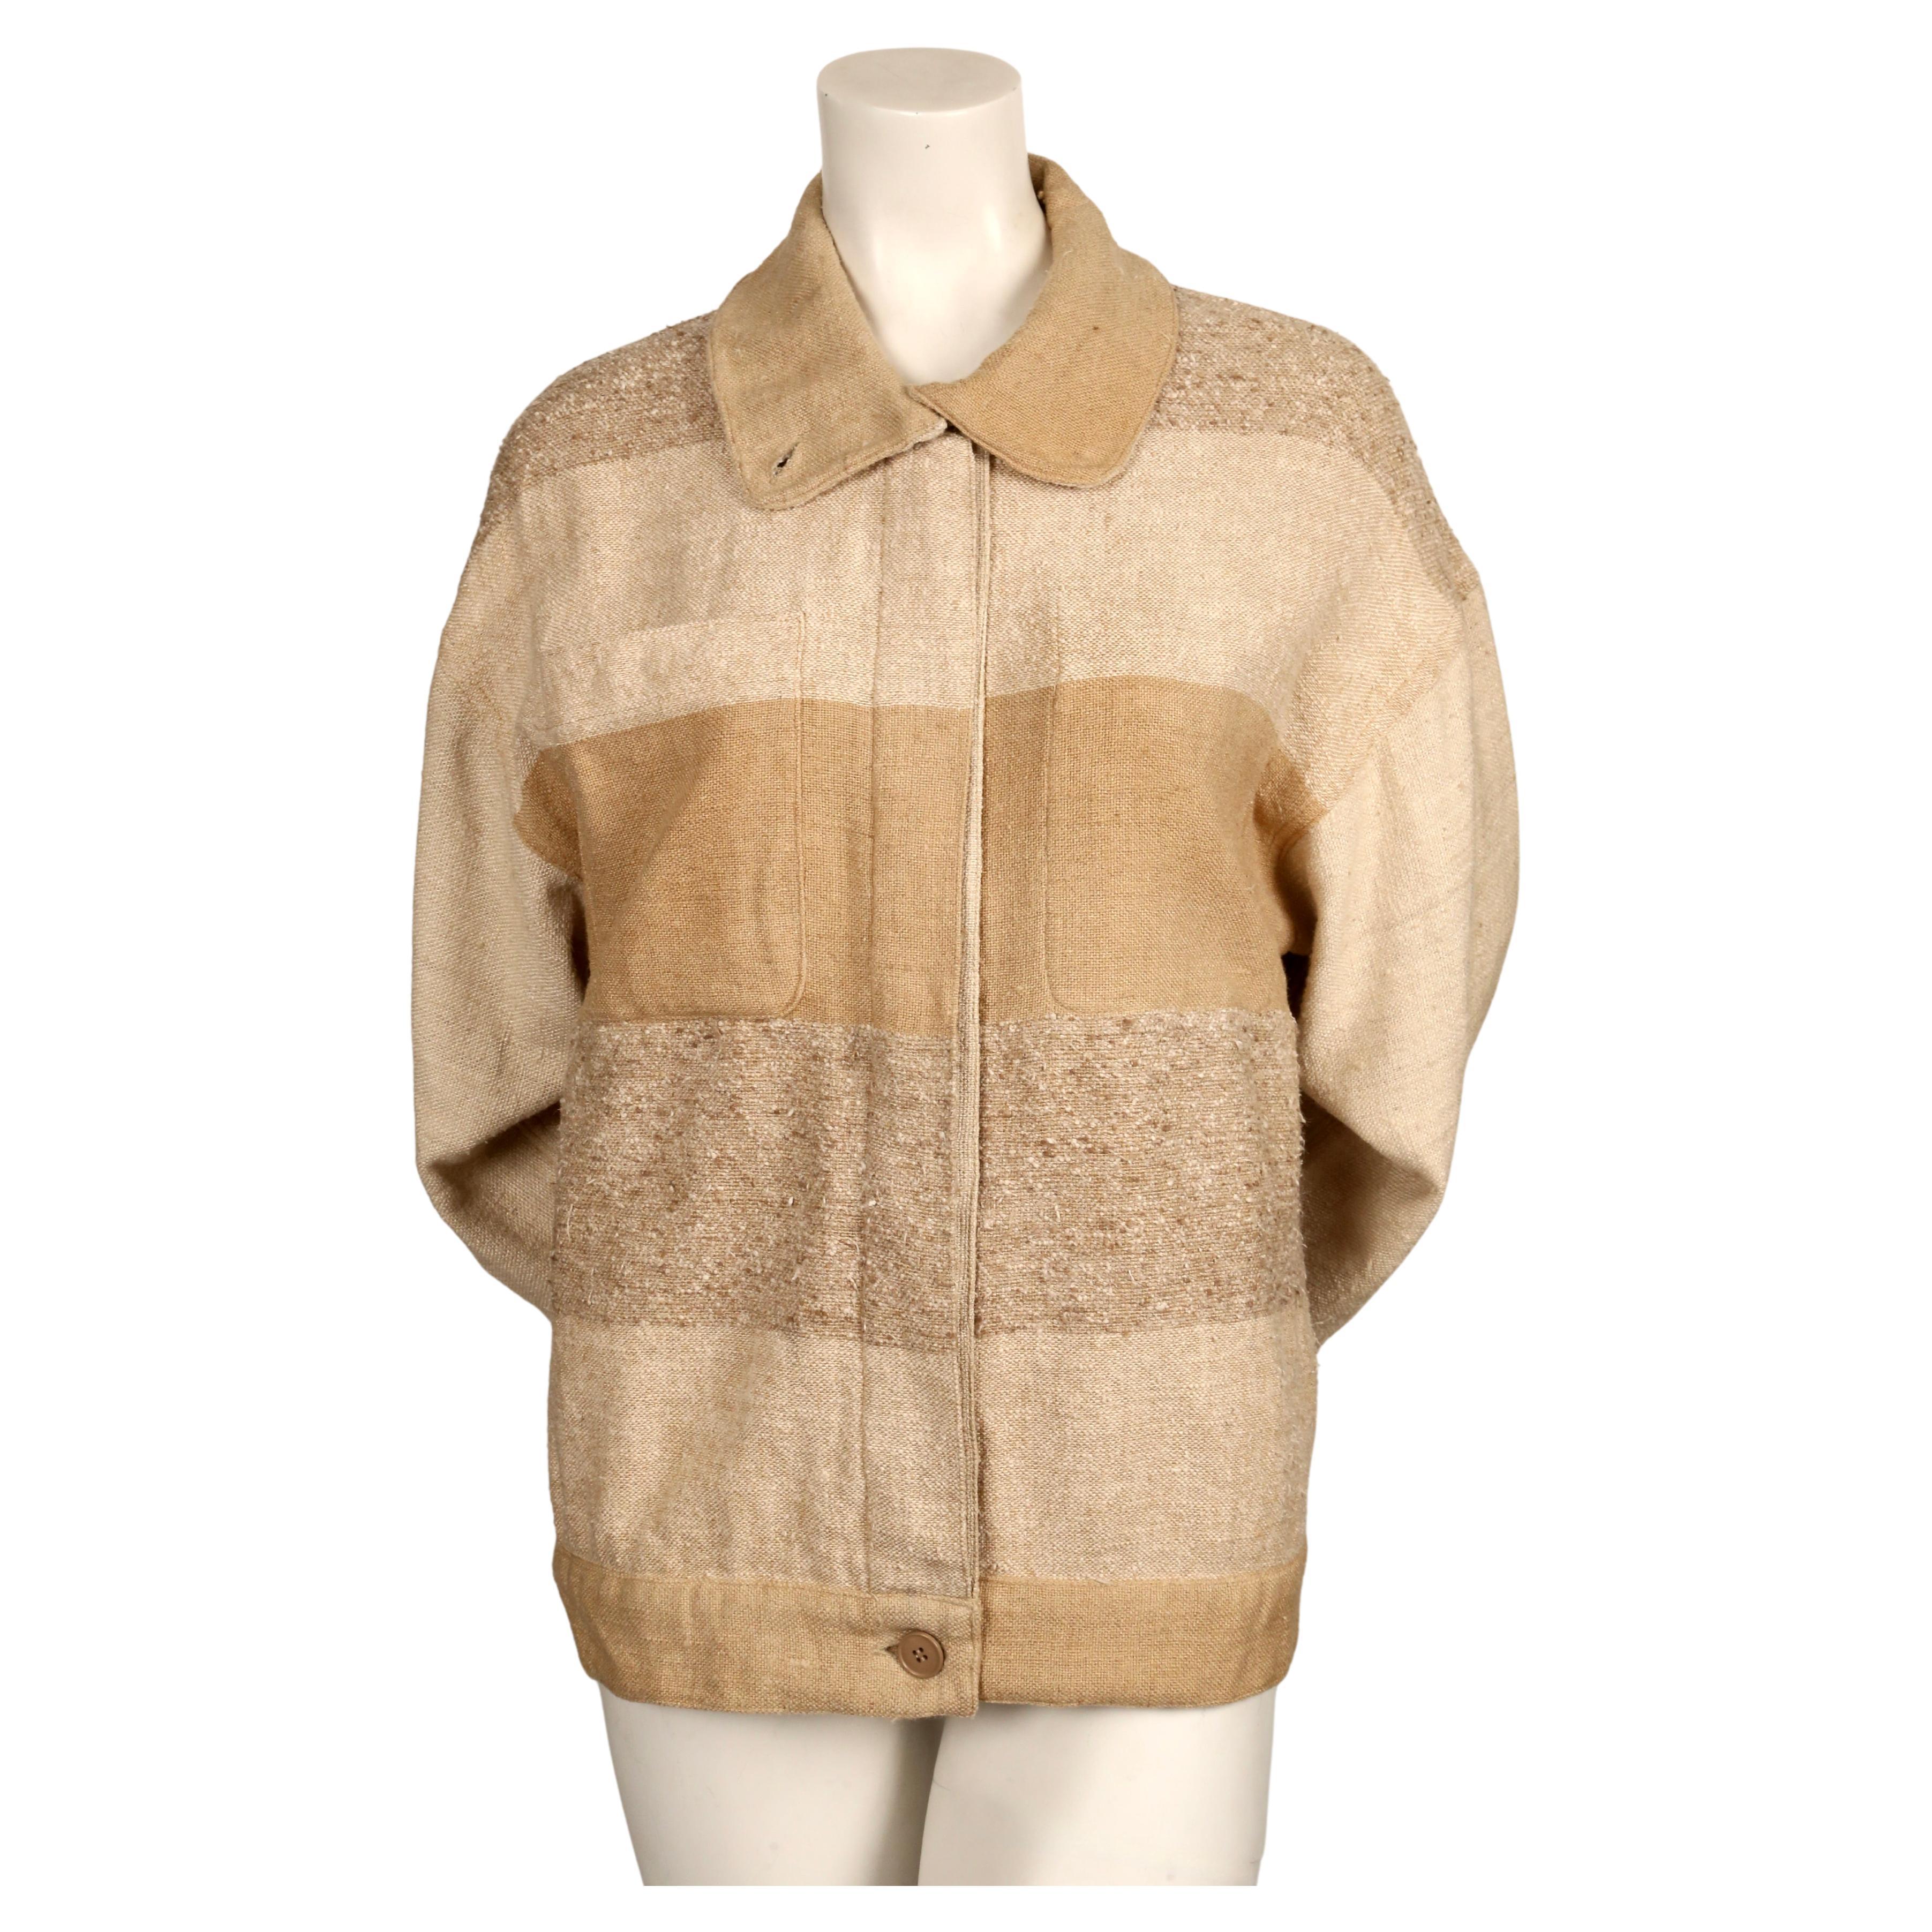 Very rare, earth-toned, raw silk jacket with stripes designed by Jean Charles de Castelbajac for KO and CO dating to the 1970's. No size indicated however this best fits an XS to a size M. Approximate measurements: drop shoulder 23